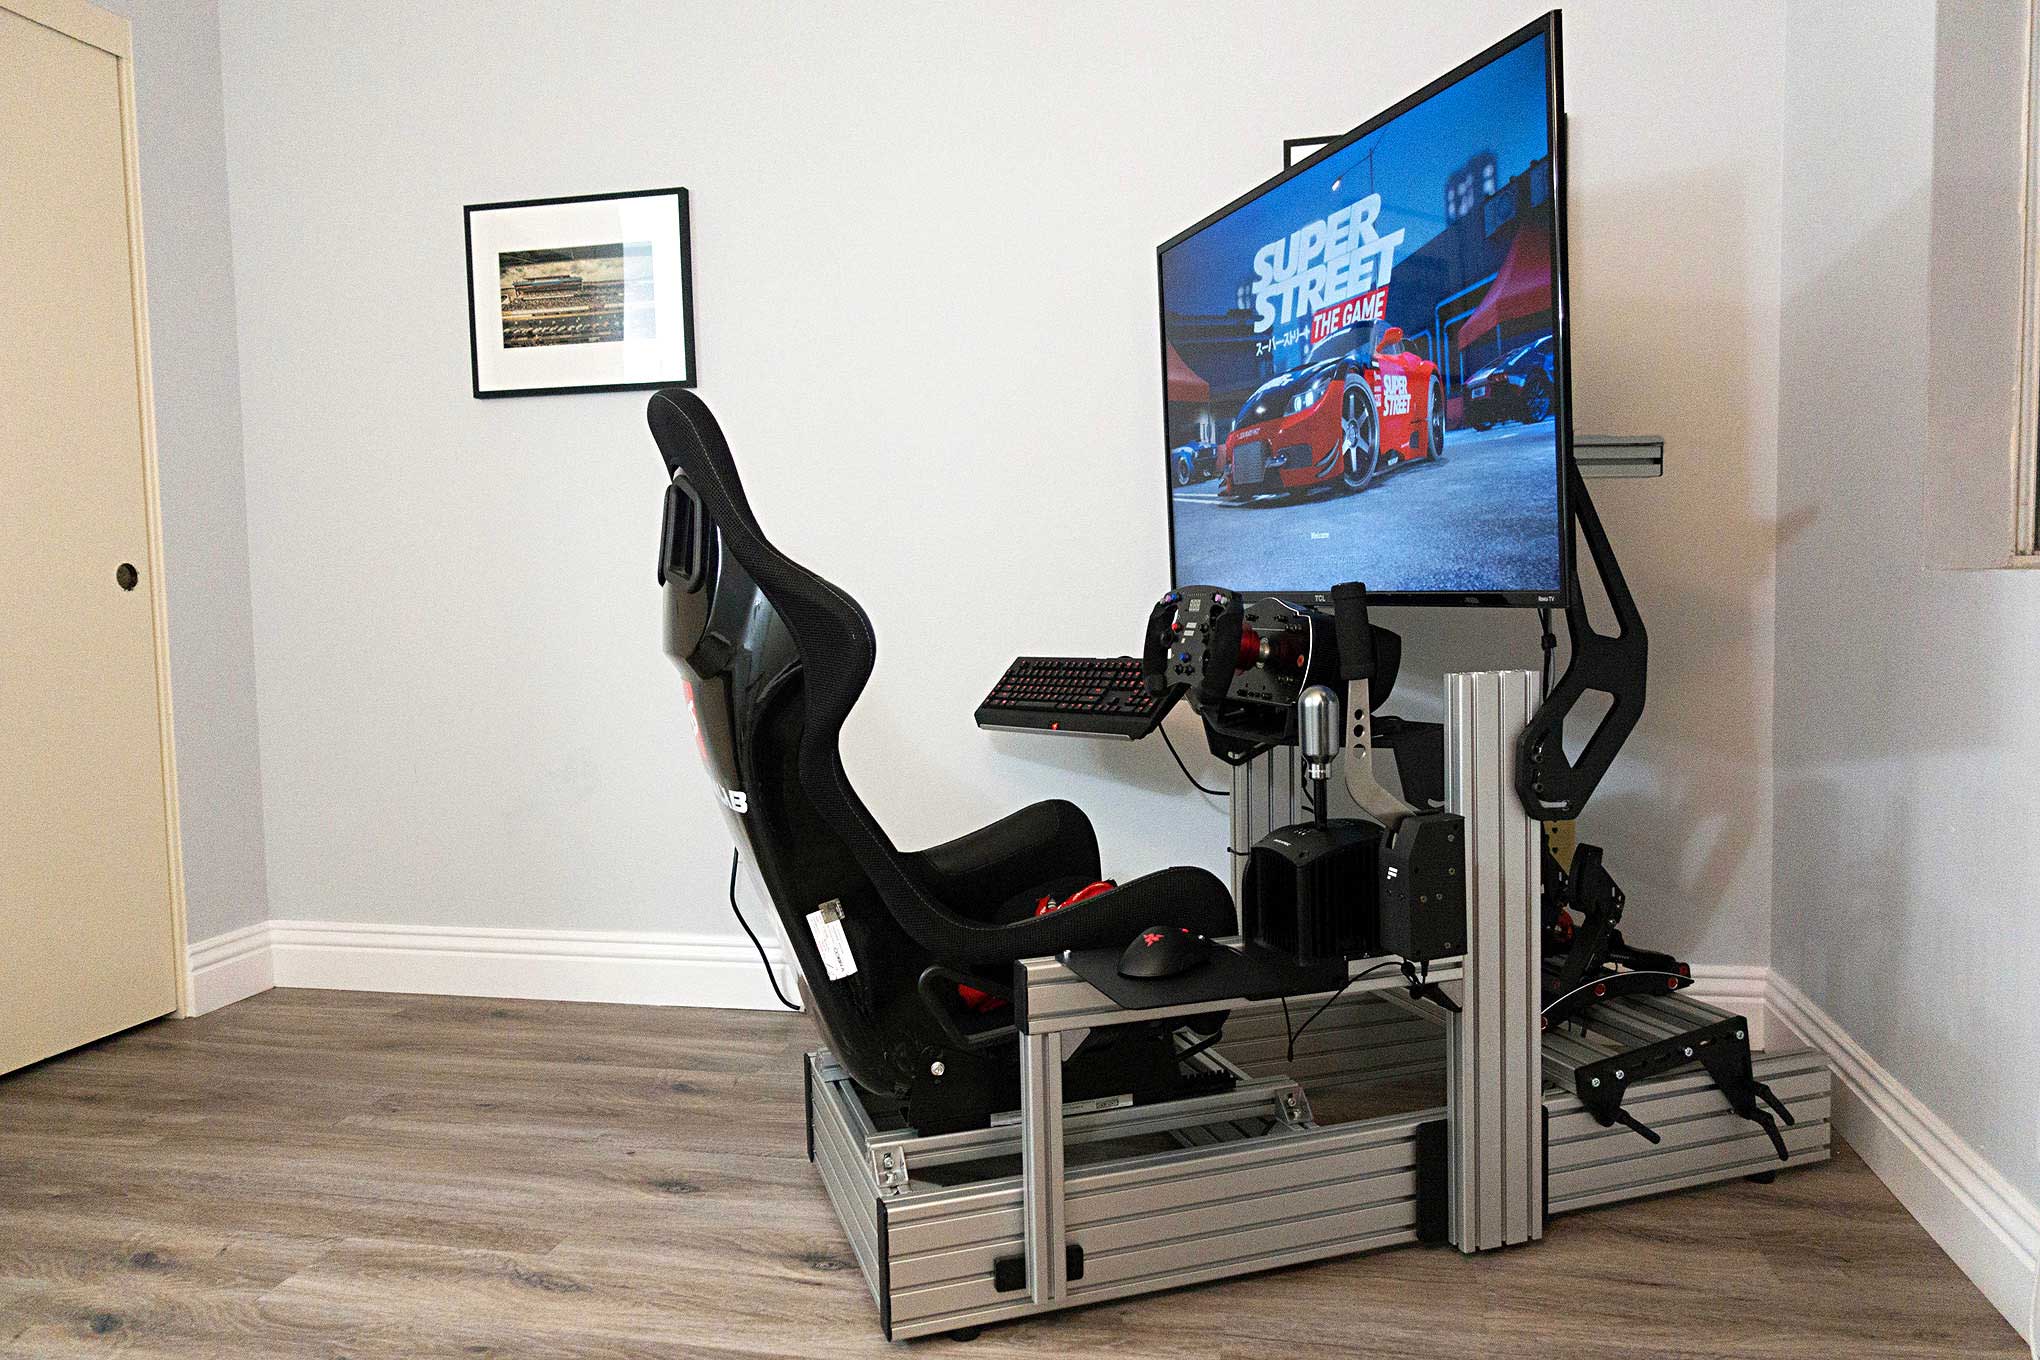 [Top 5] Best Sim Racing Cockpits that are Awesome GAMERS DECIDE